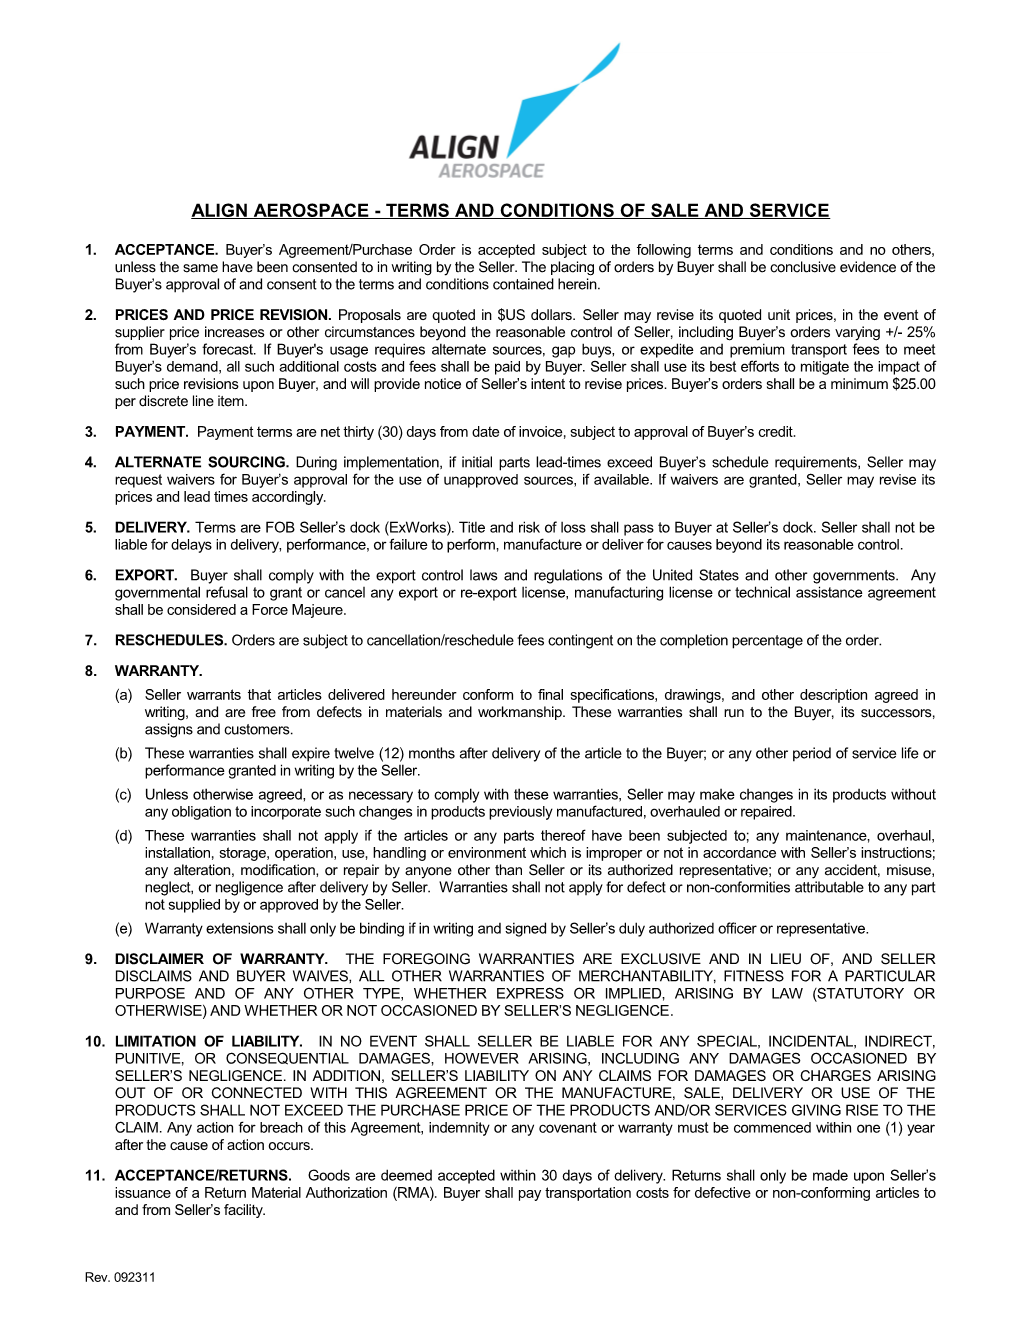 Align Aerospace - Terms and Conditions of Sale and Service